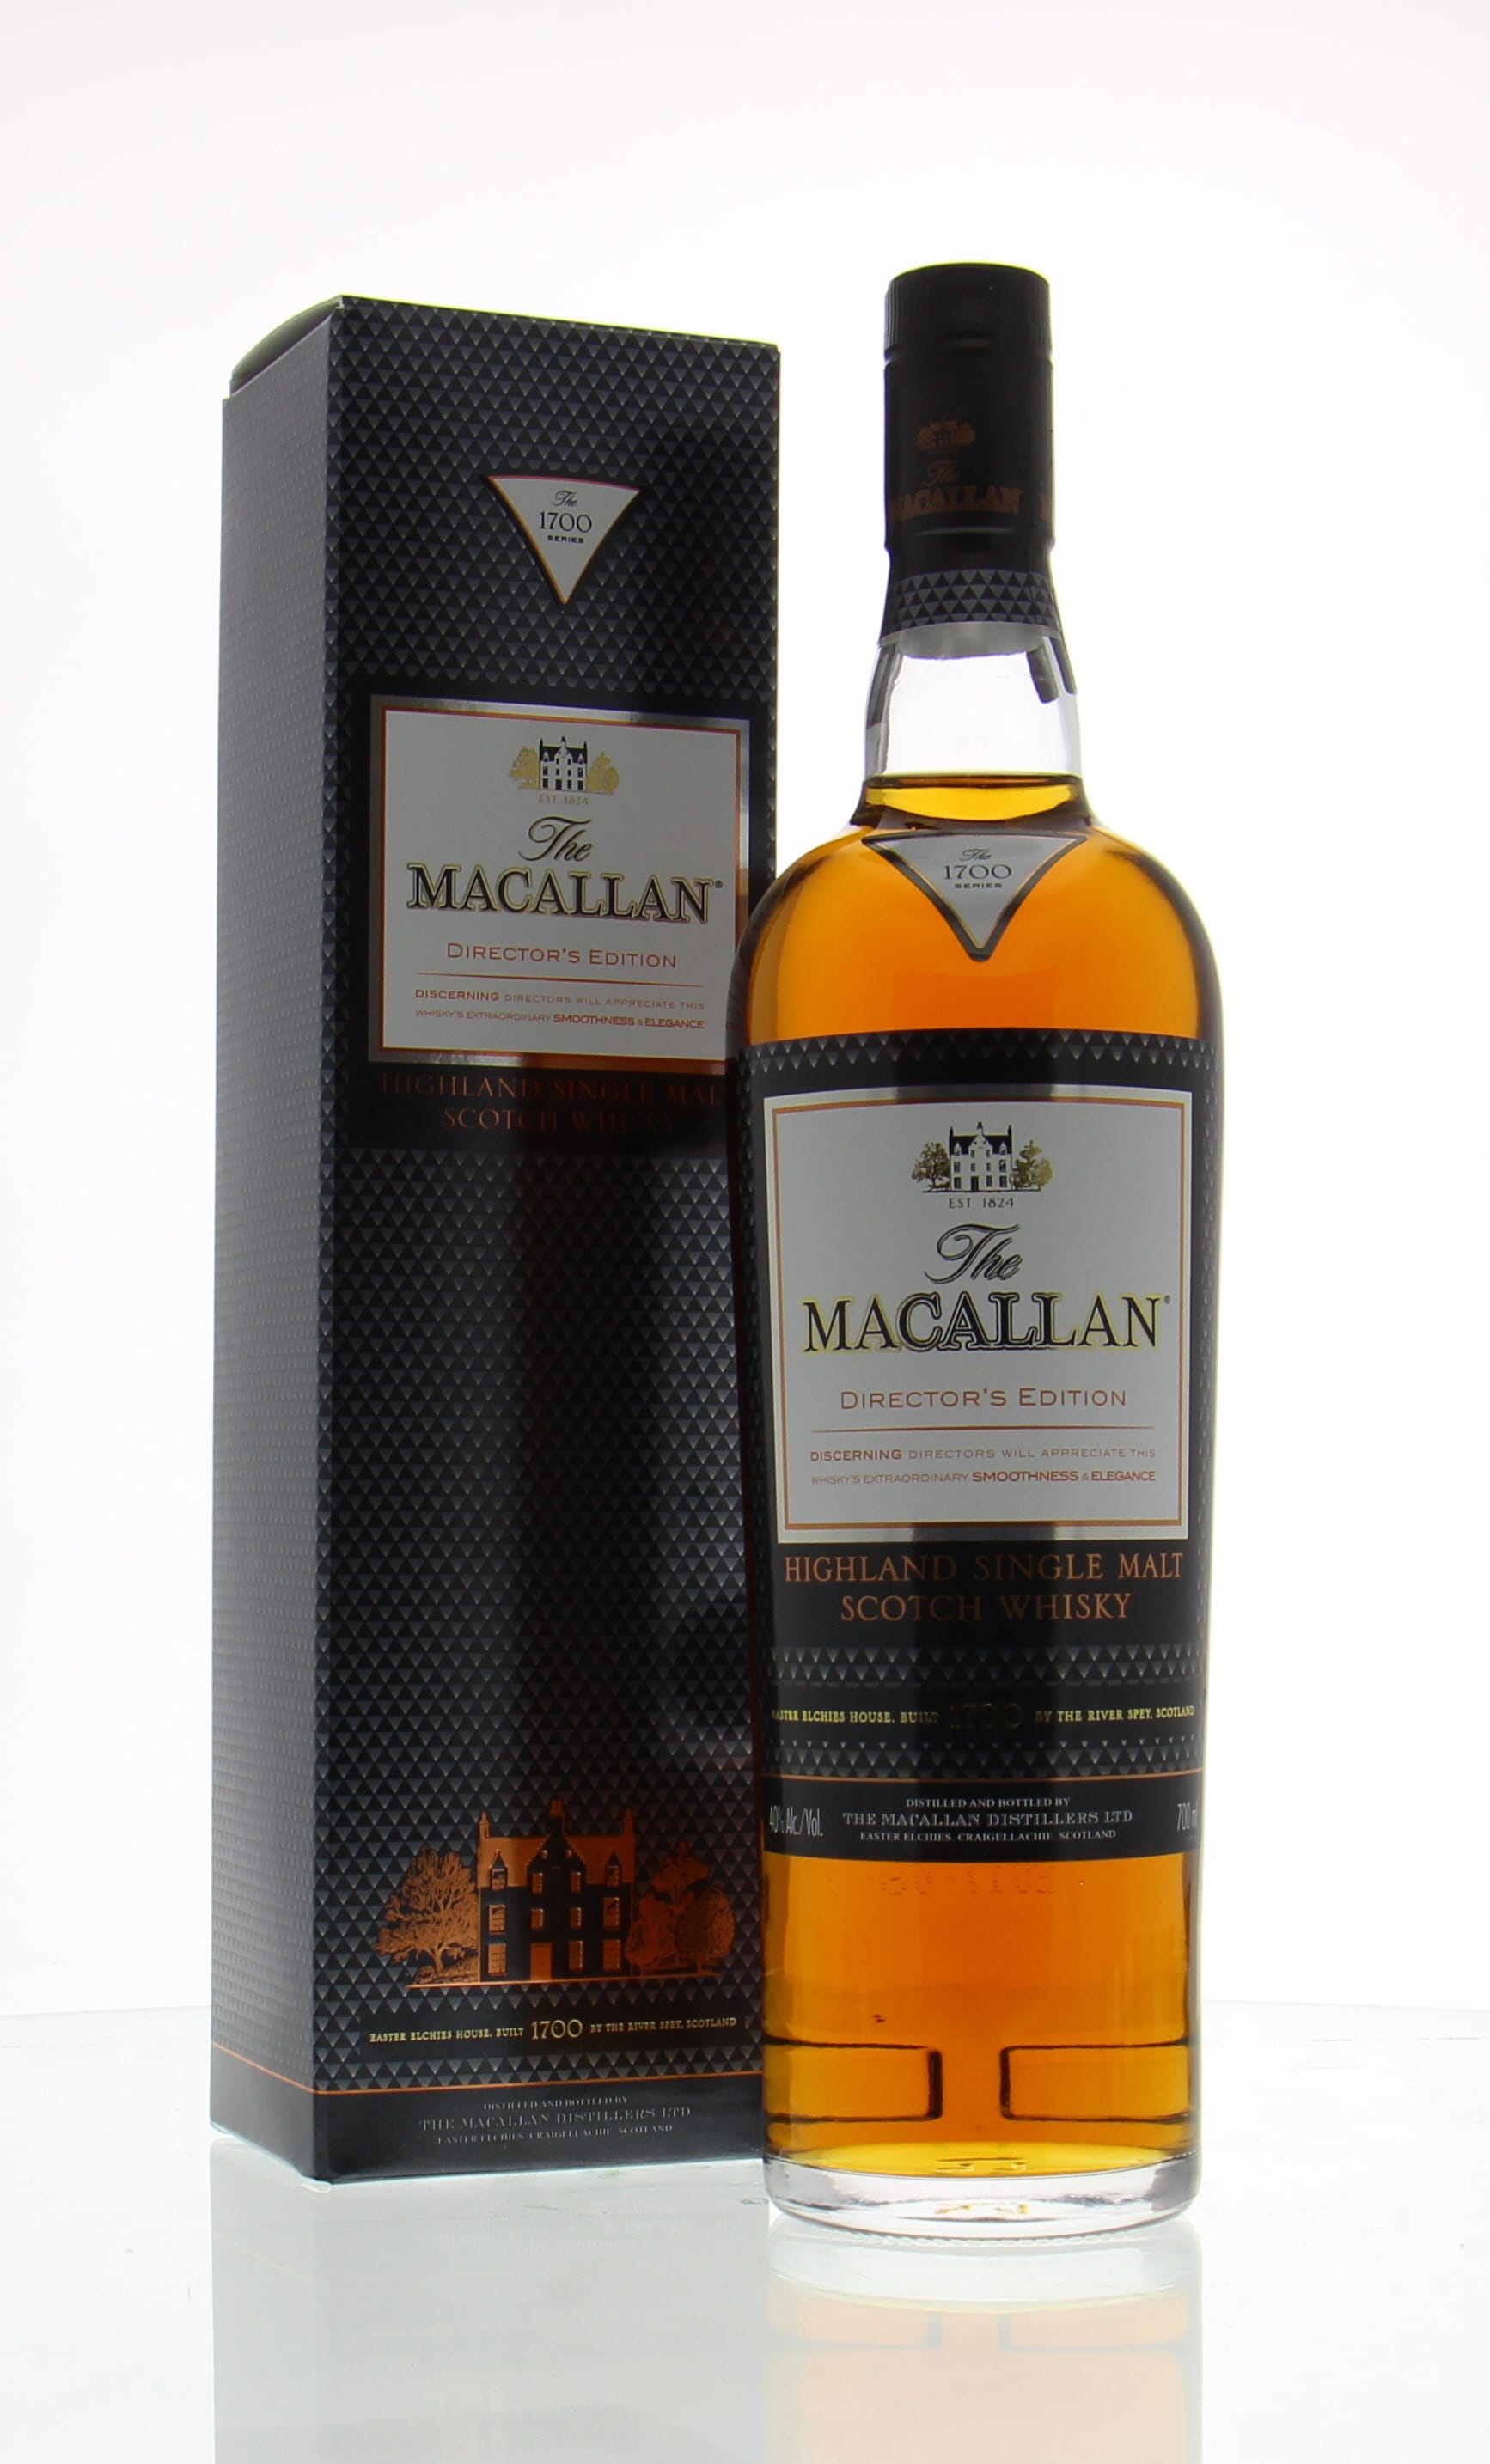 Macallan - Director's Edition The 1700 Series 40% NV